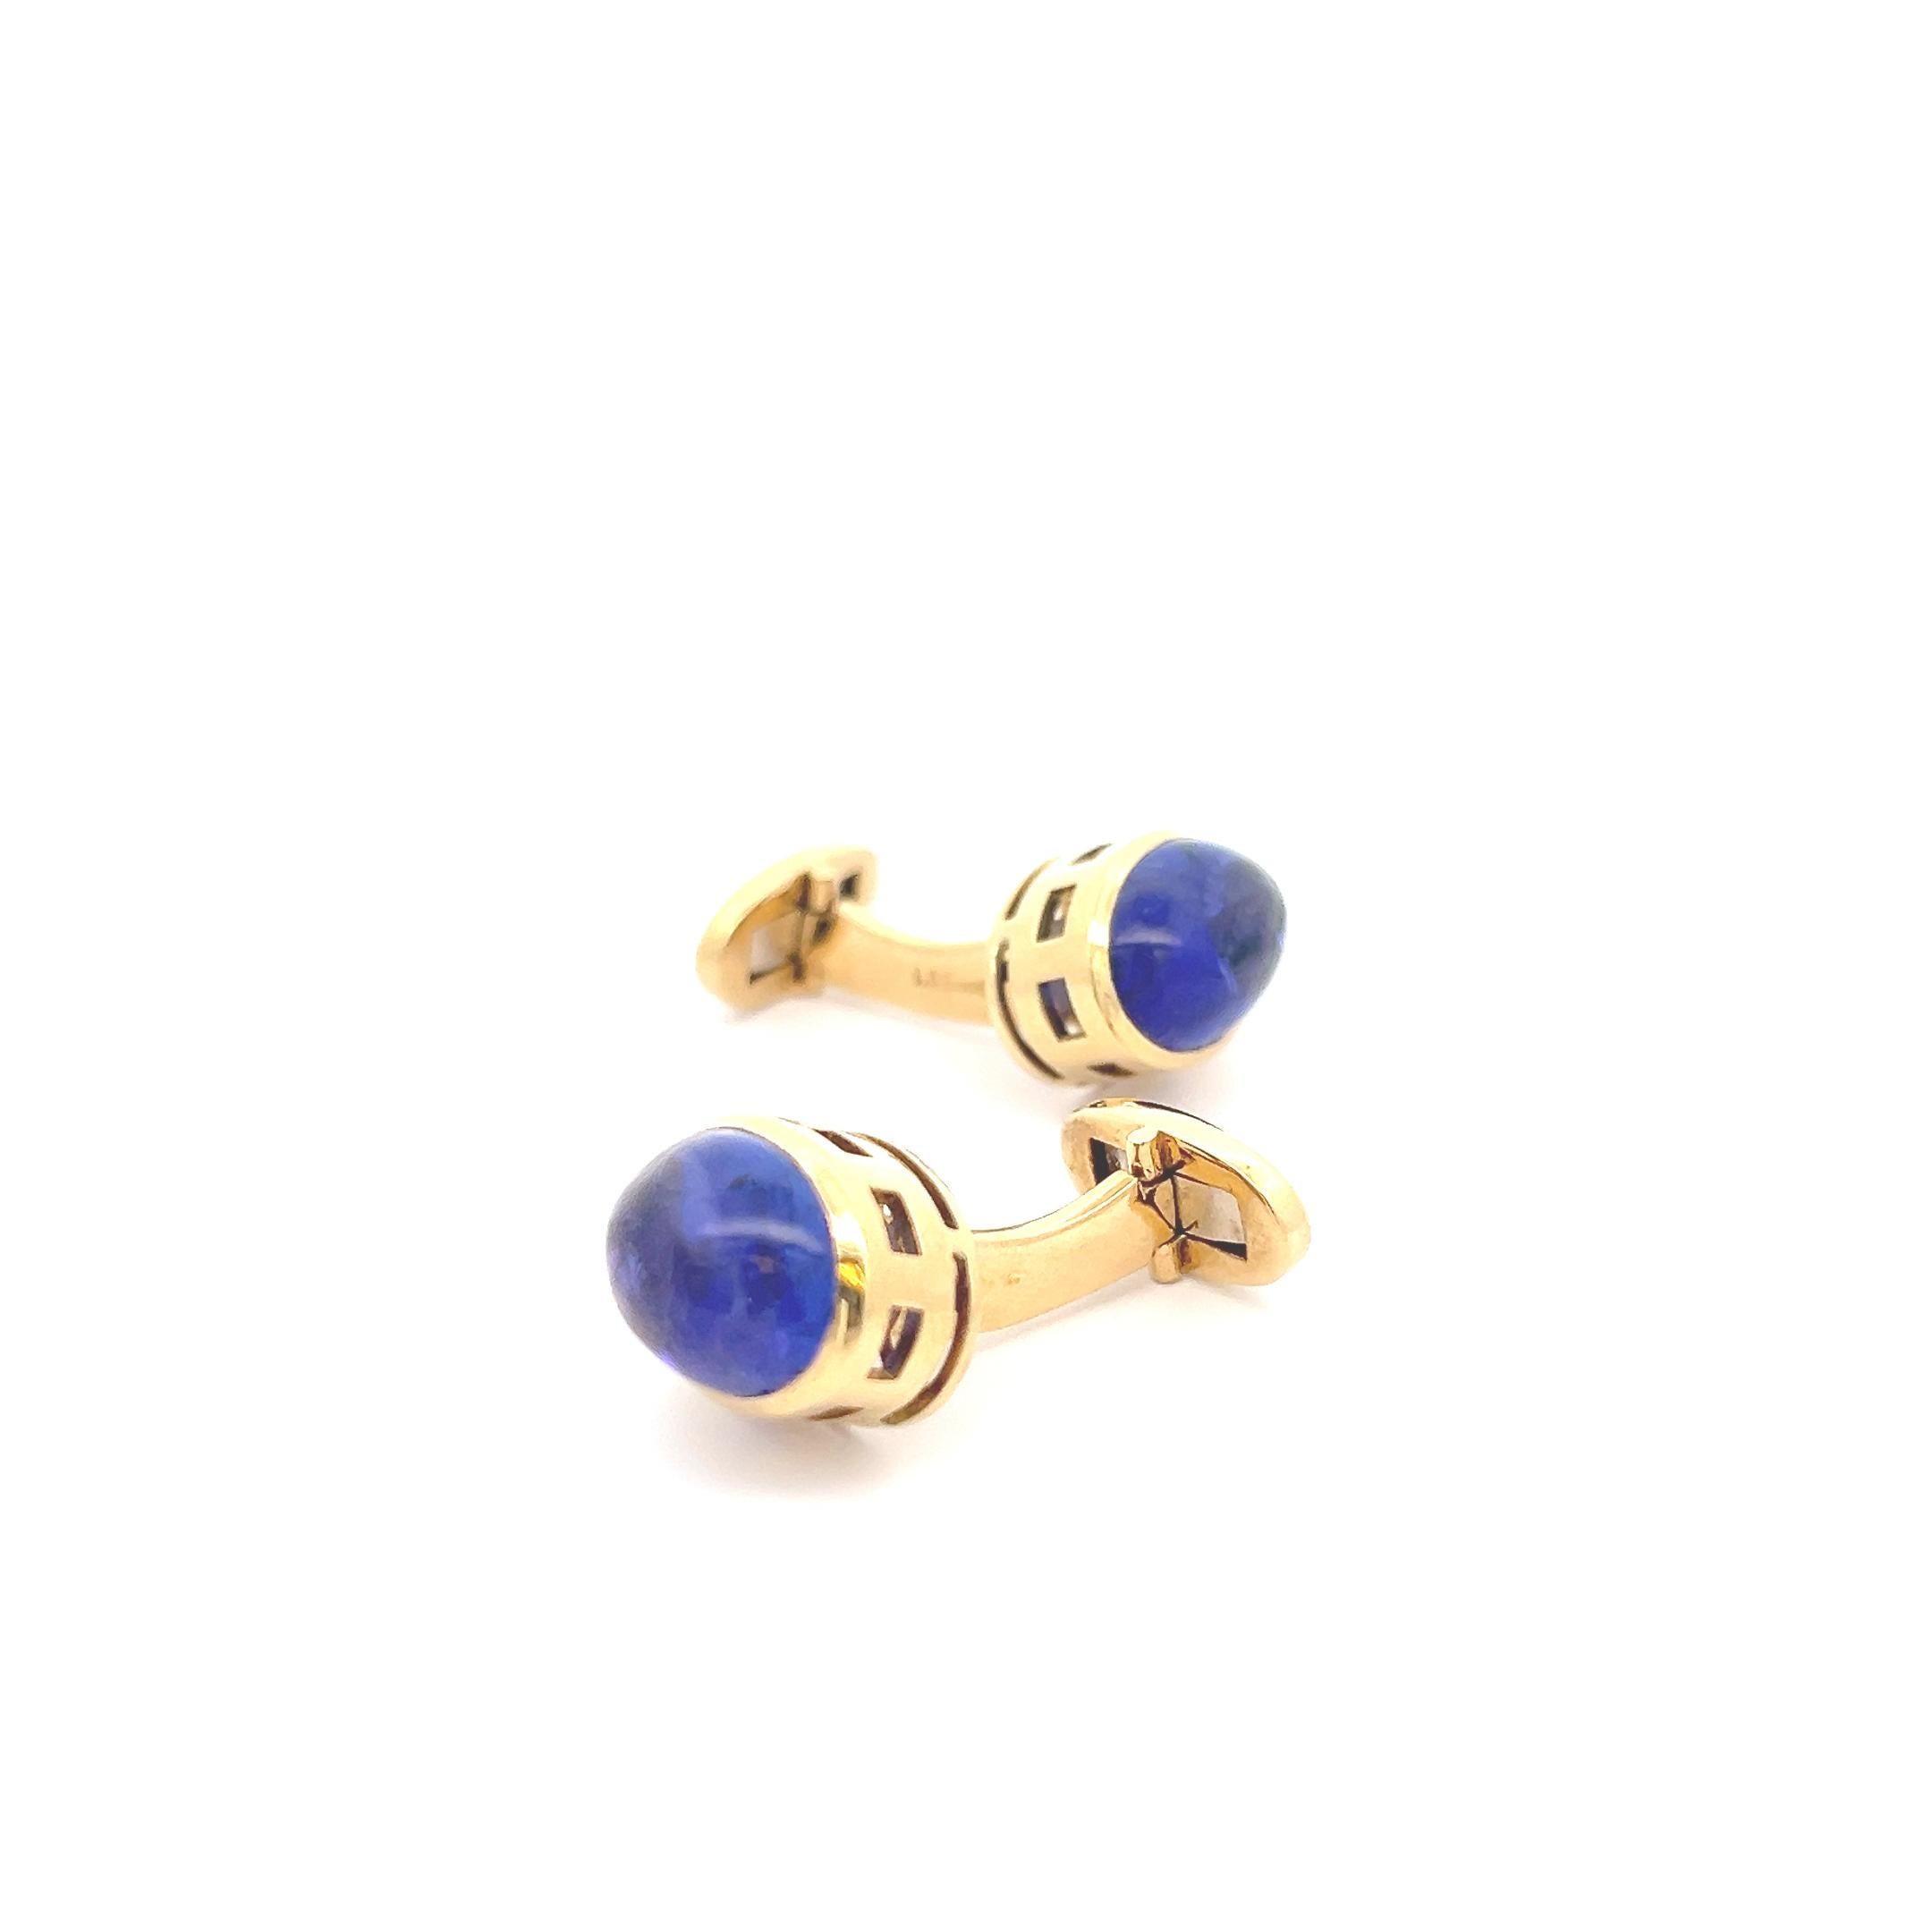 Indulge in the epitome of luxury and sophistication with these exquisite 18k yellow gold cufflinks, adorned with a magnificent display of tanzanite cabochons and blue sapphire baguettes.
At the forefront of each cufflink, gleaming oval tanzanite